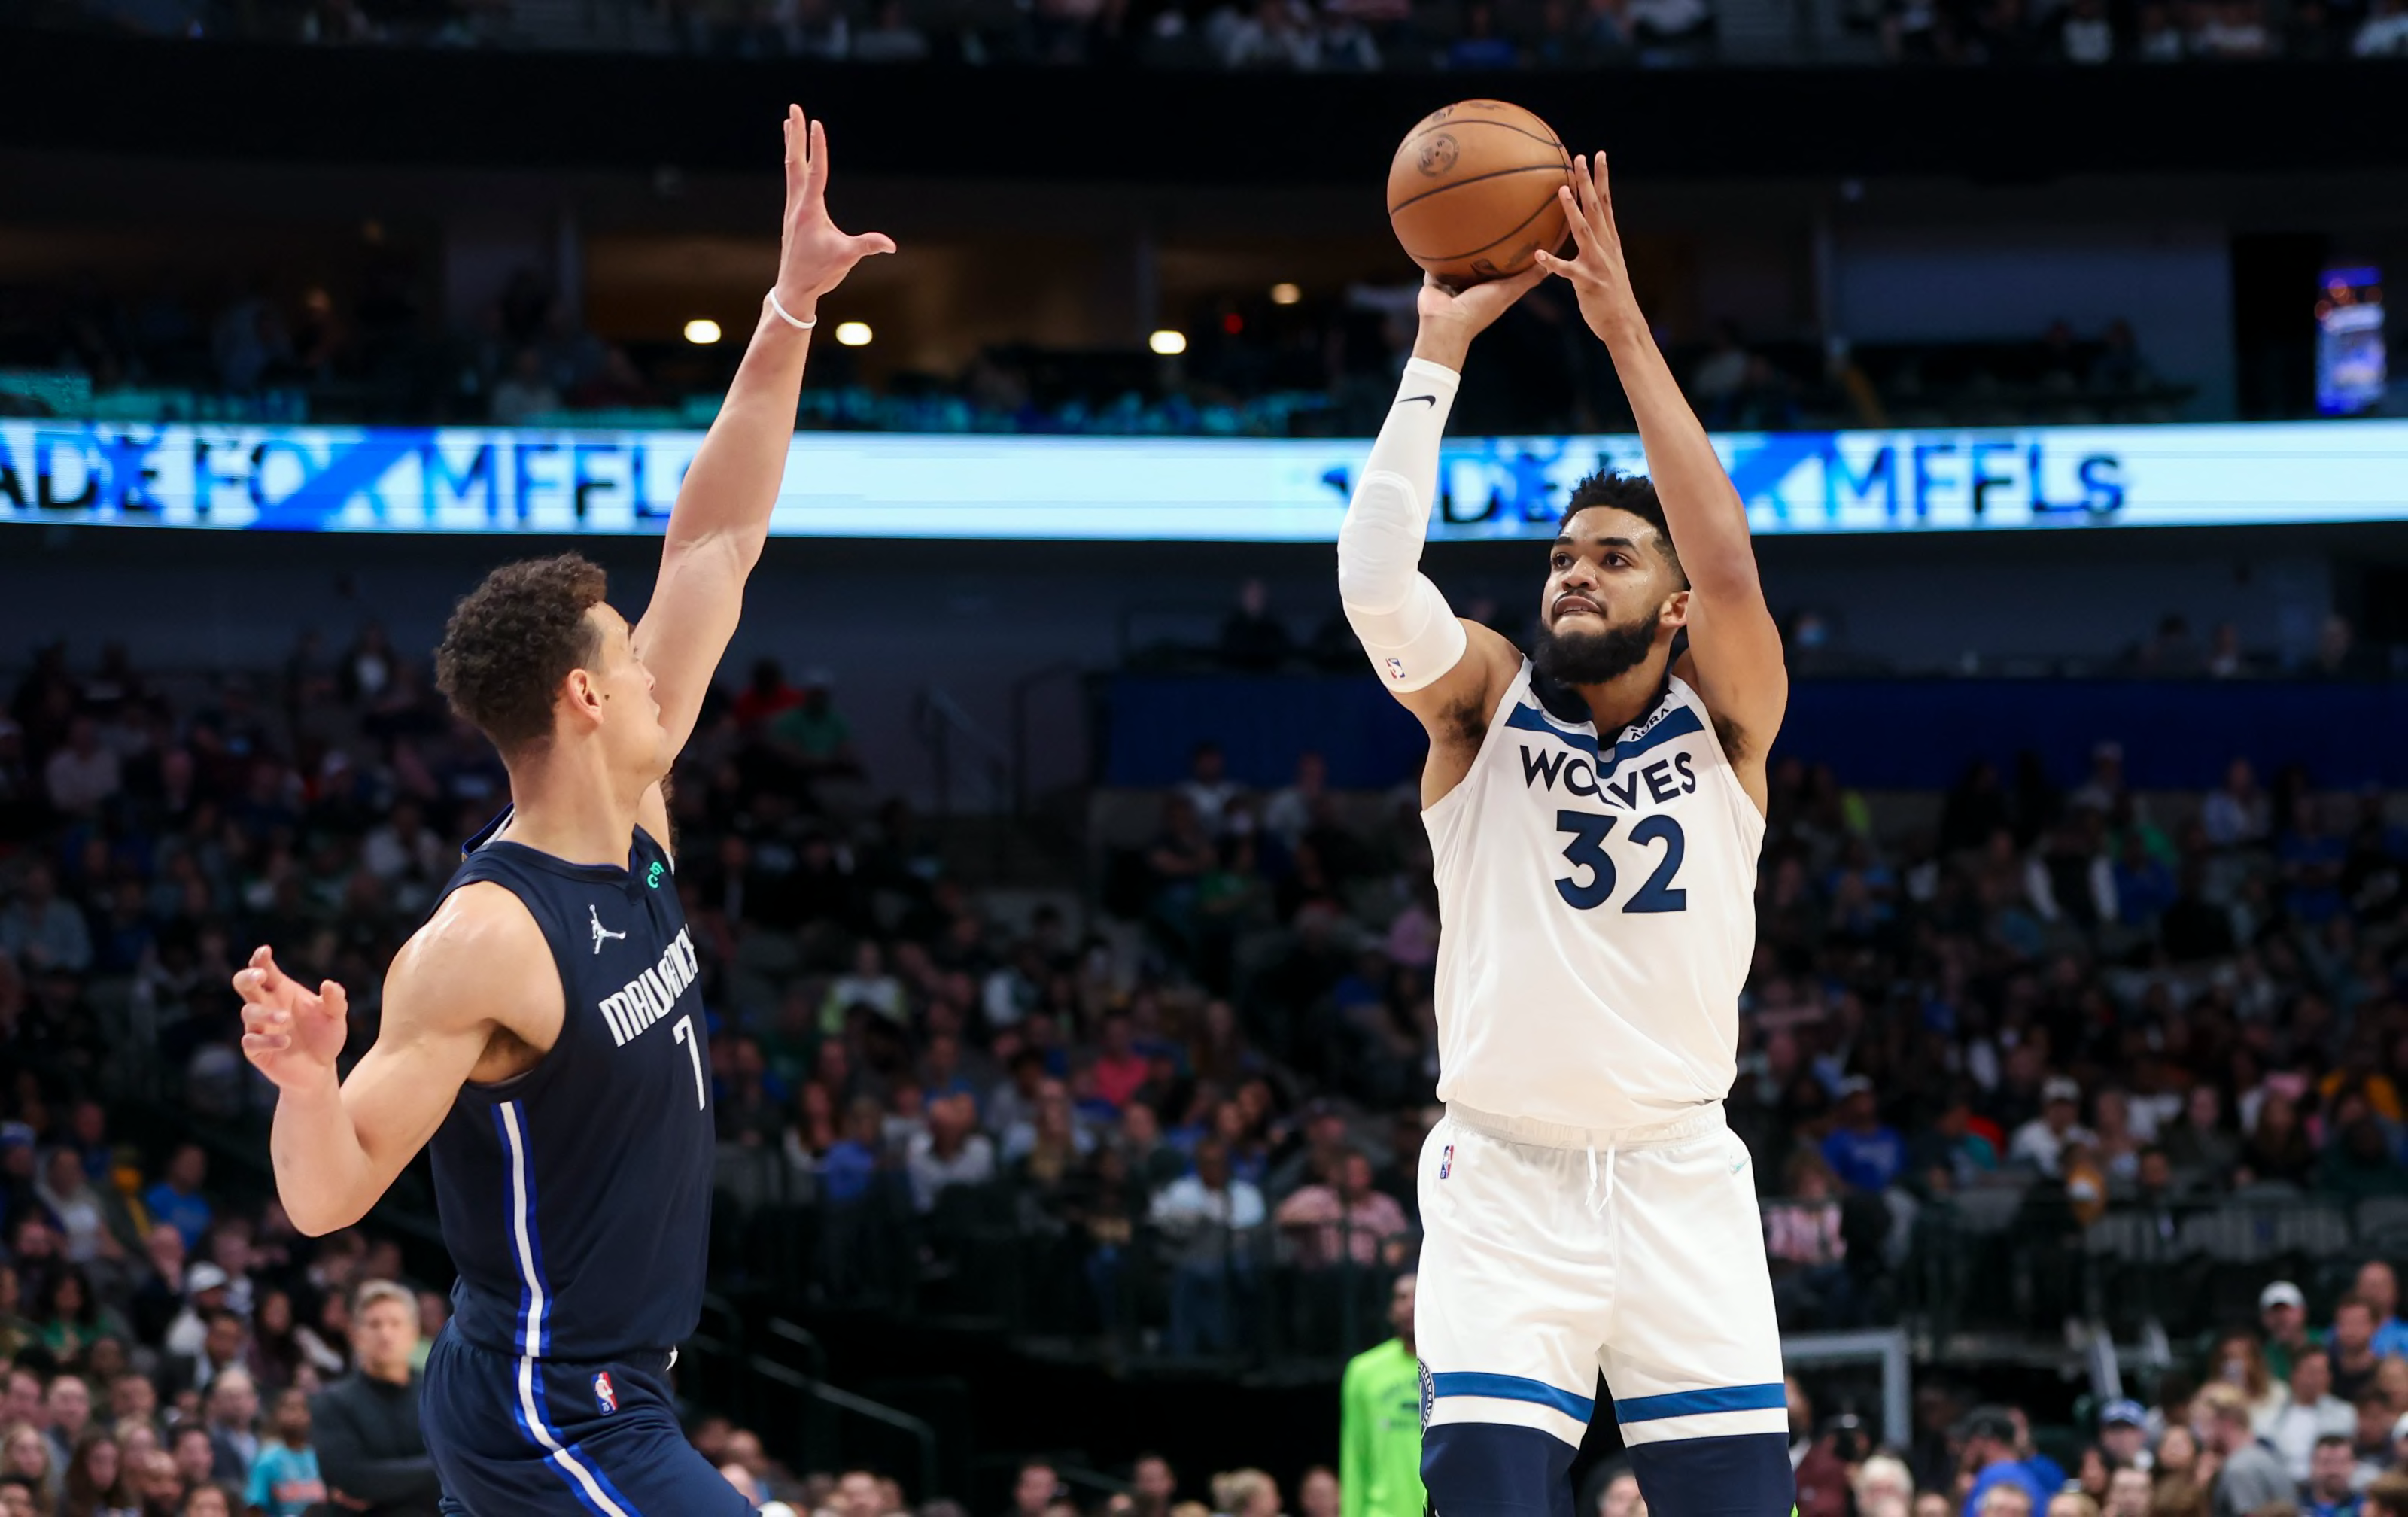 NBA Today dives into KAT calling himself one of the 'best offensive players  the league has seen' 🧐 